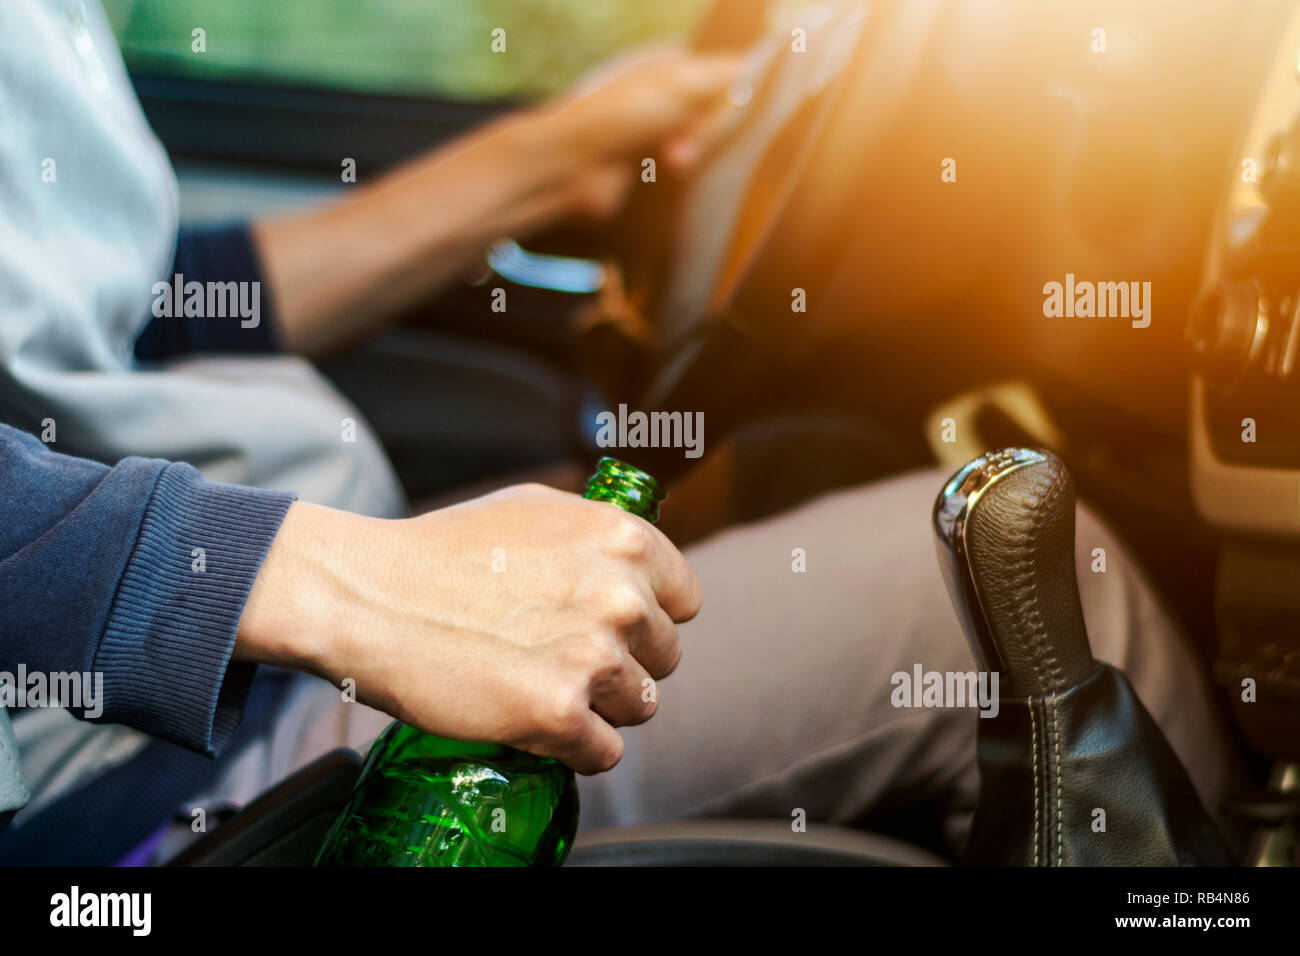 Drinking and driving ,man drinking alcohol and using mobile phone while driving car ,concept drive safely while using a cell phone or drunk alcohol Stock Photo